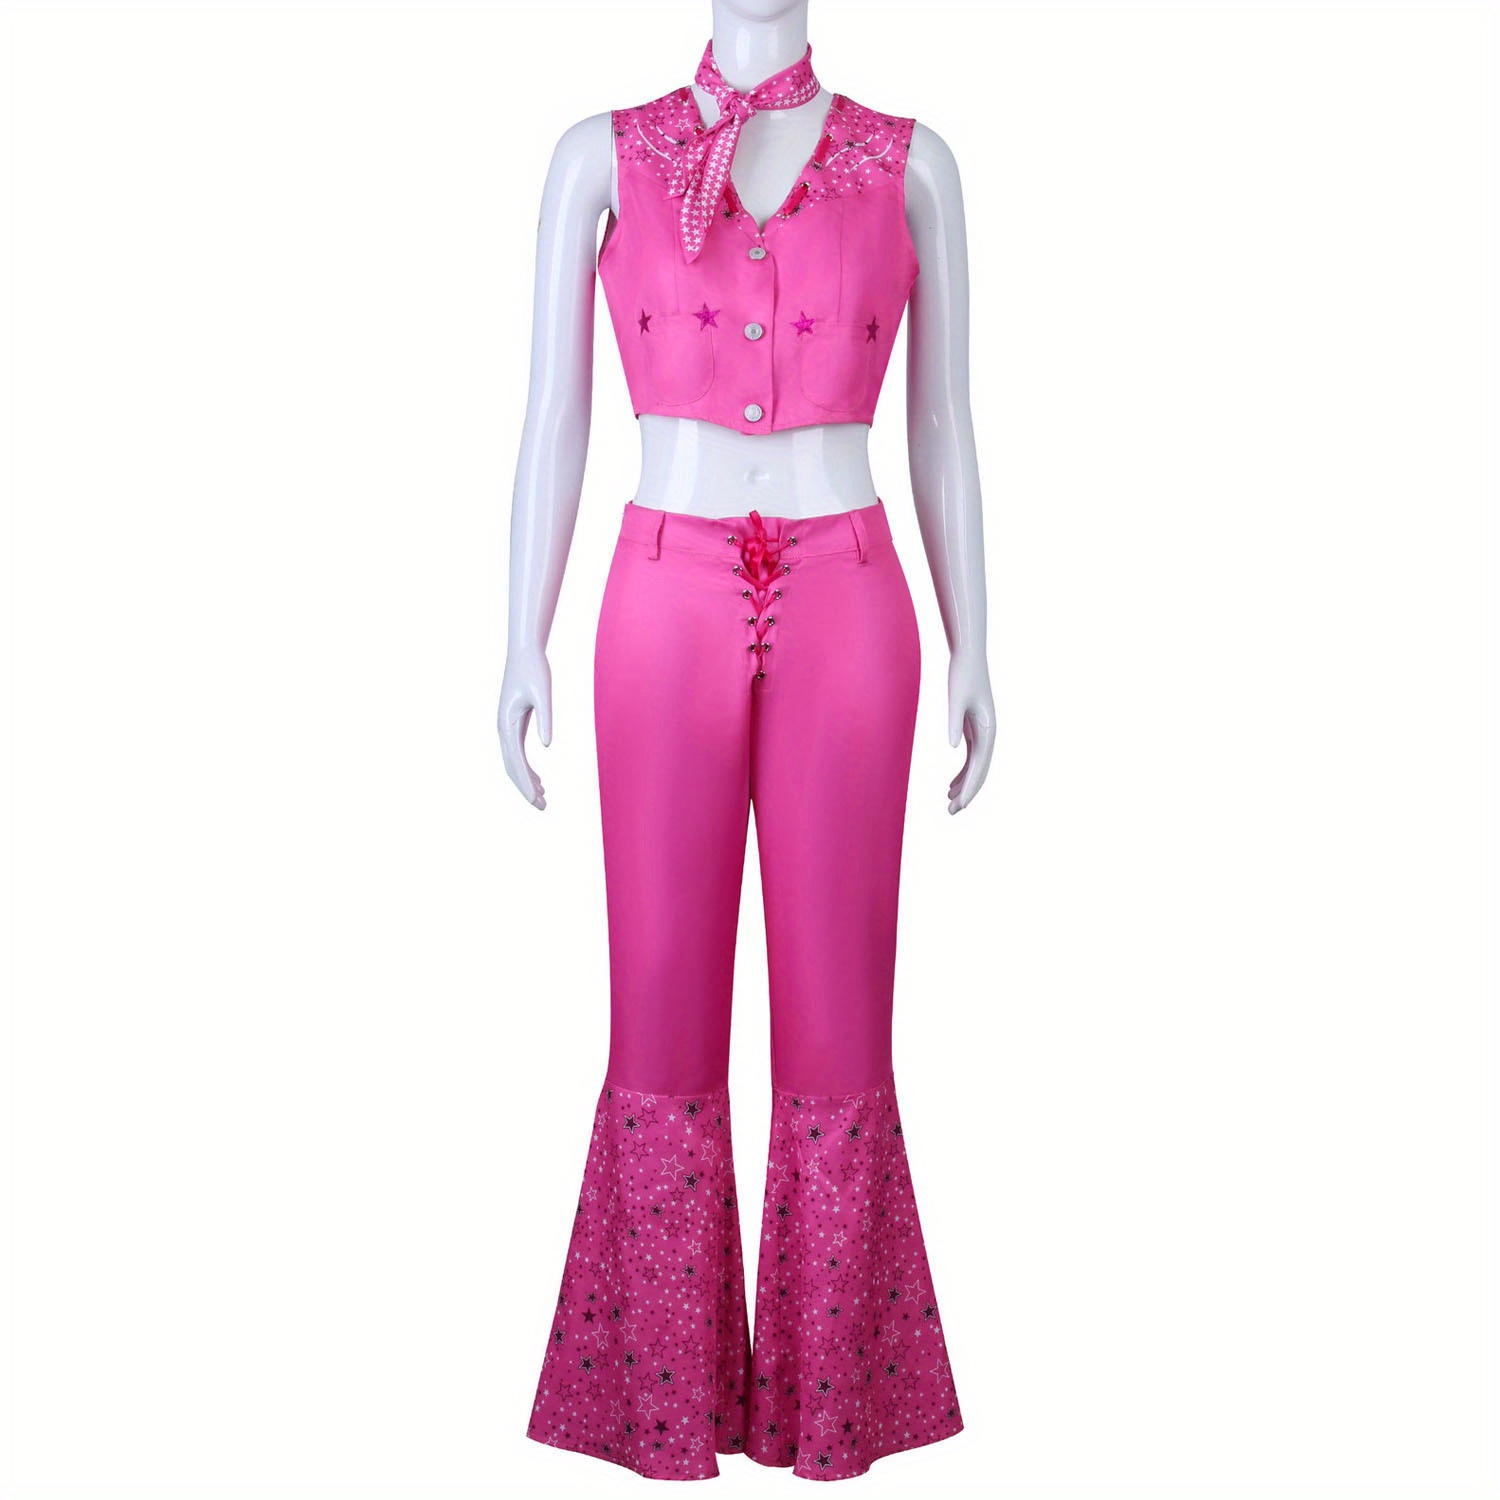 5pcs 70s Costume For Women 70s Disco Costume Pants Bell Bottom Flared Pants  Hippie Vintage Style Clothing (Larger Size)